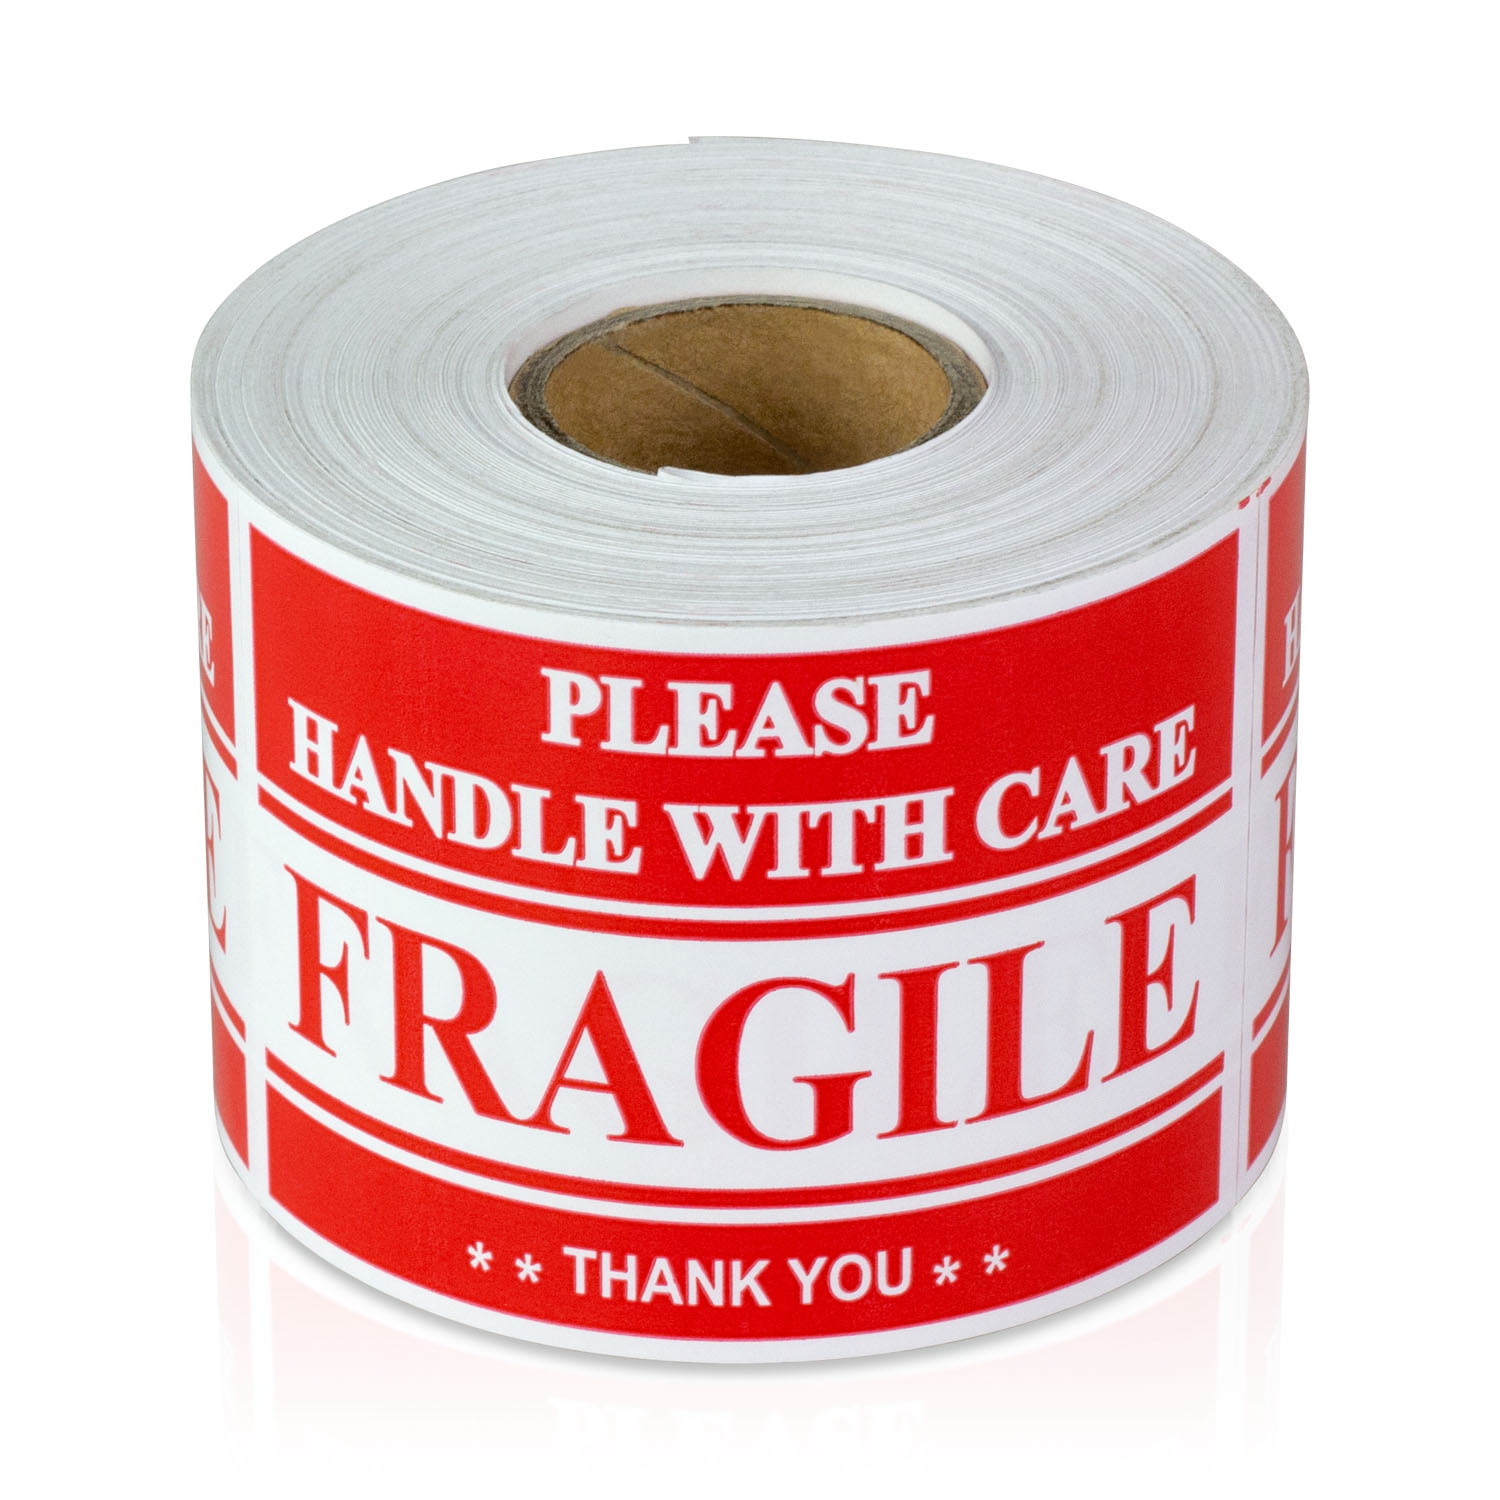 Fragile handle with care stickers x 250 Large on roll! 